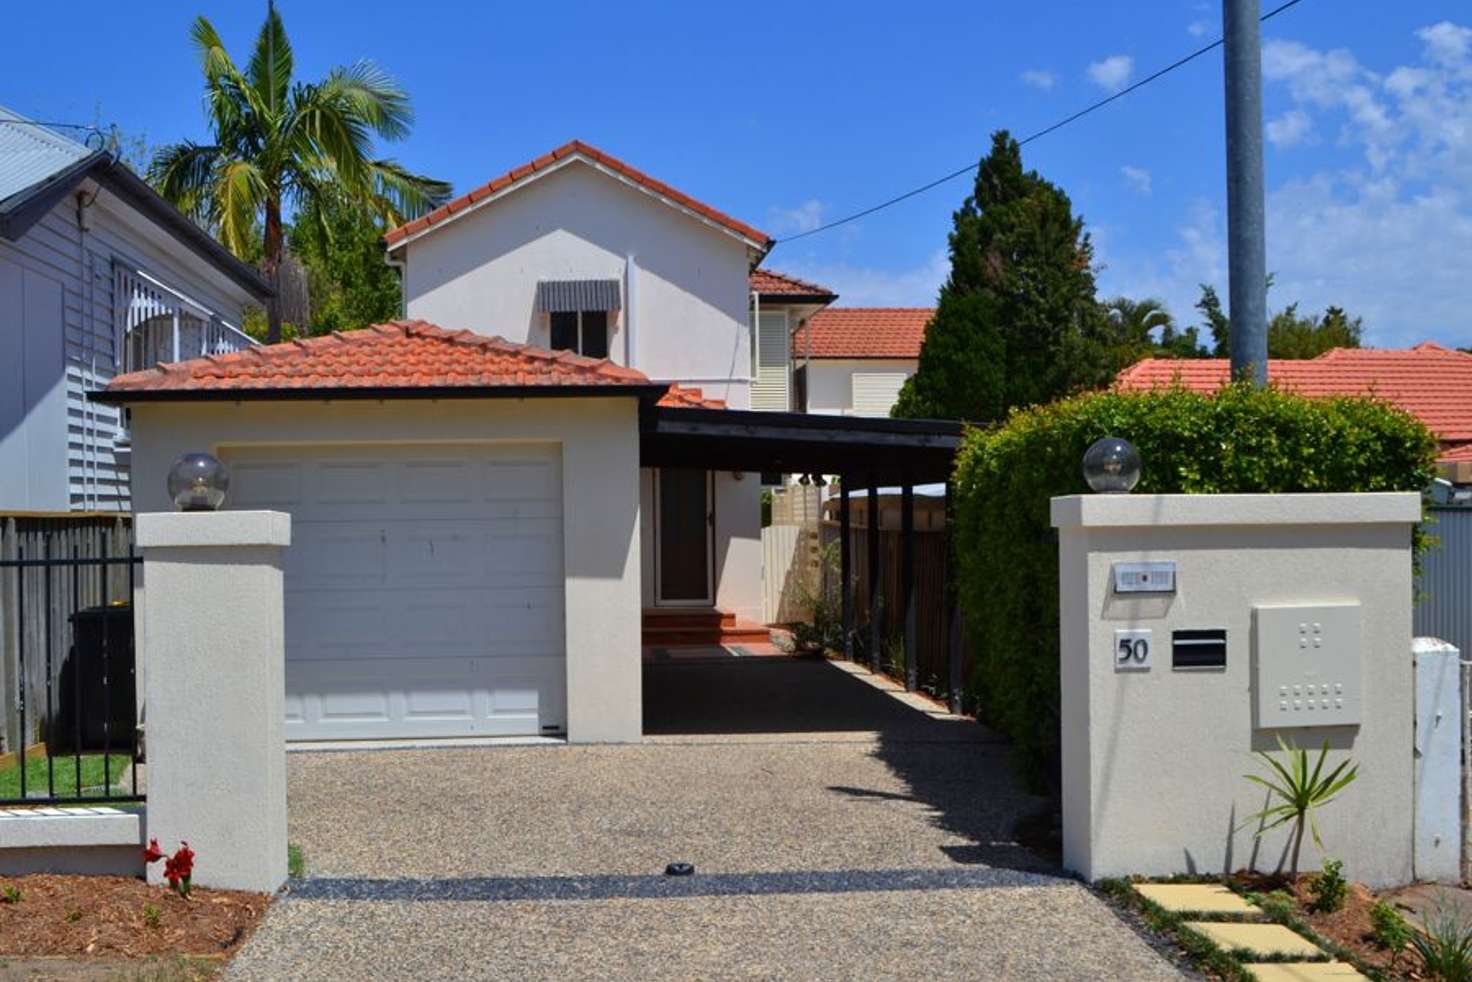 Main view of Homely villa listing, 50 Drury Street, West End QLD 4101